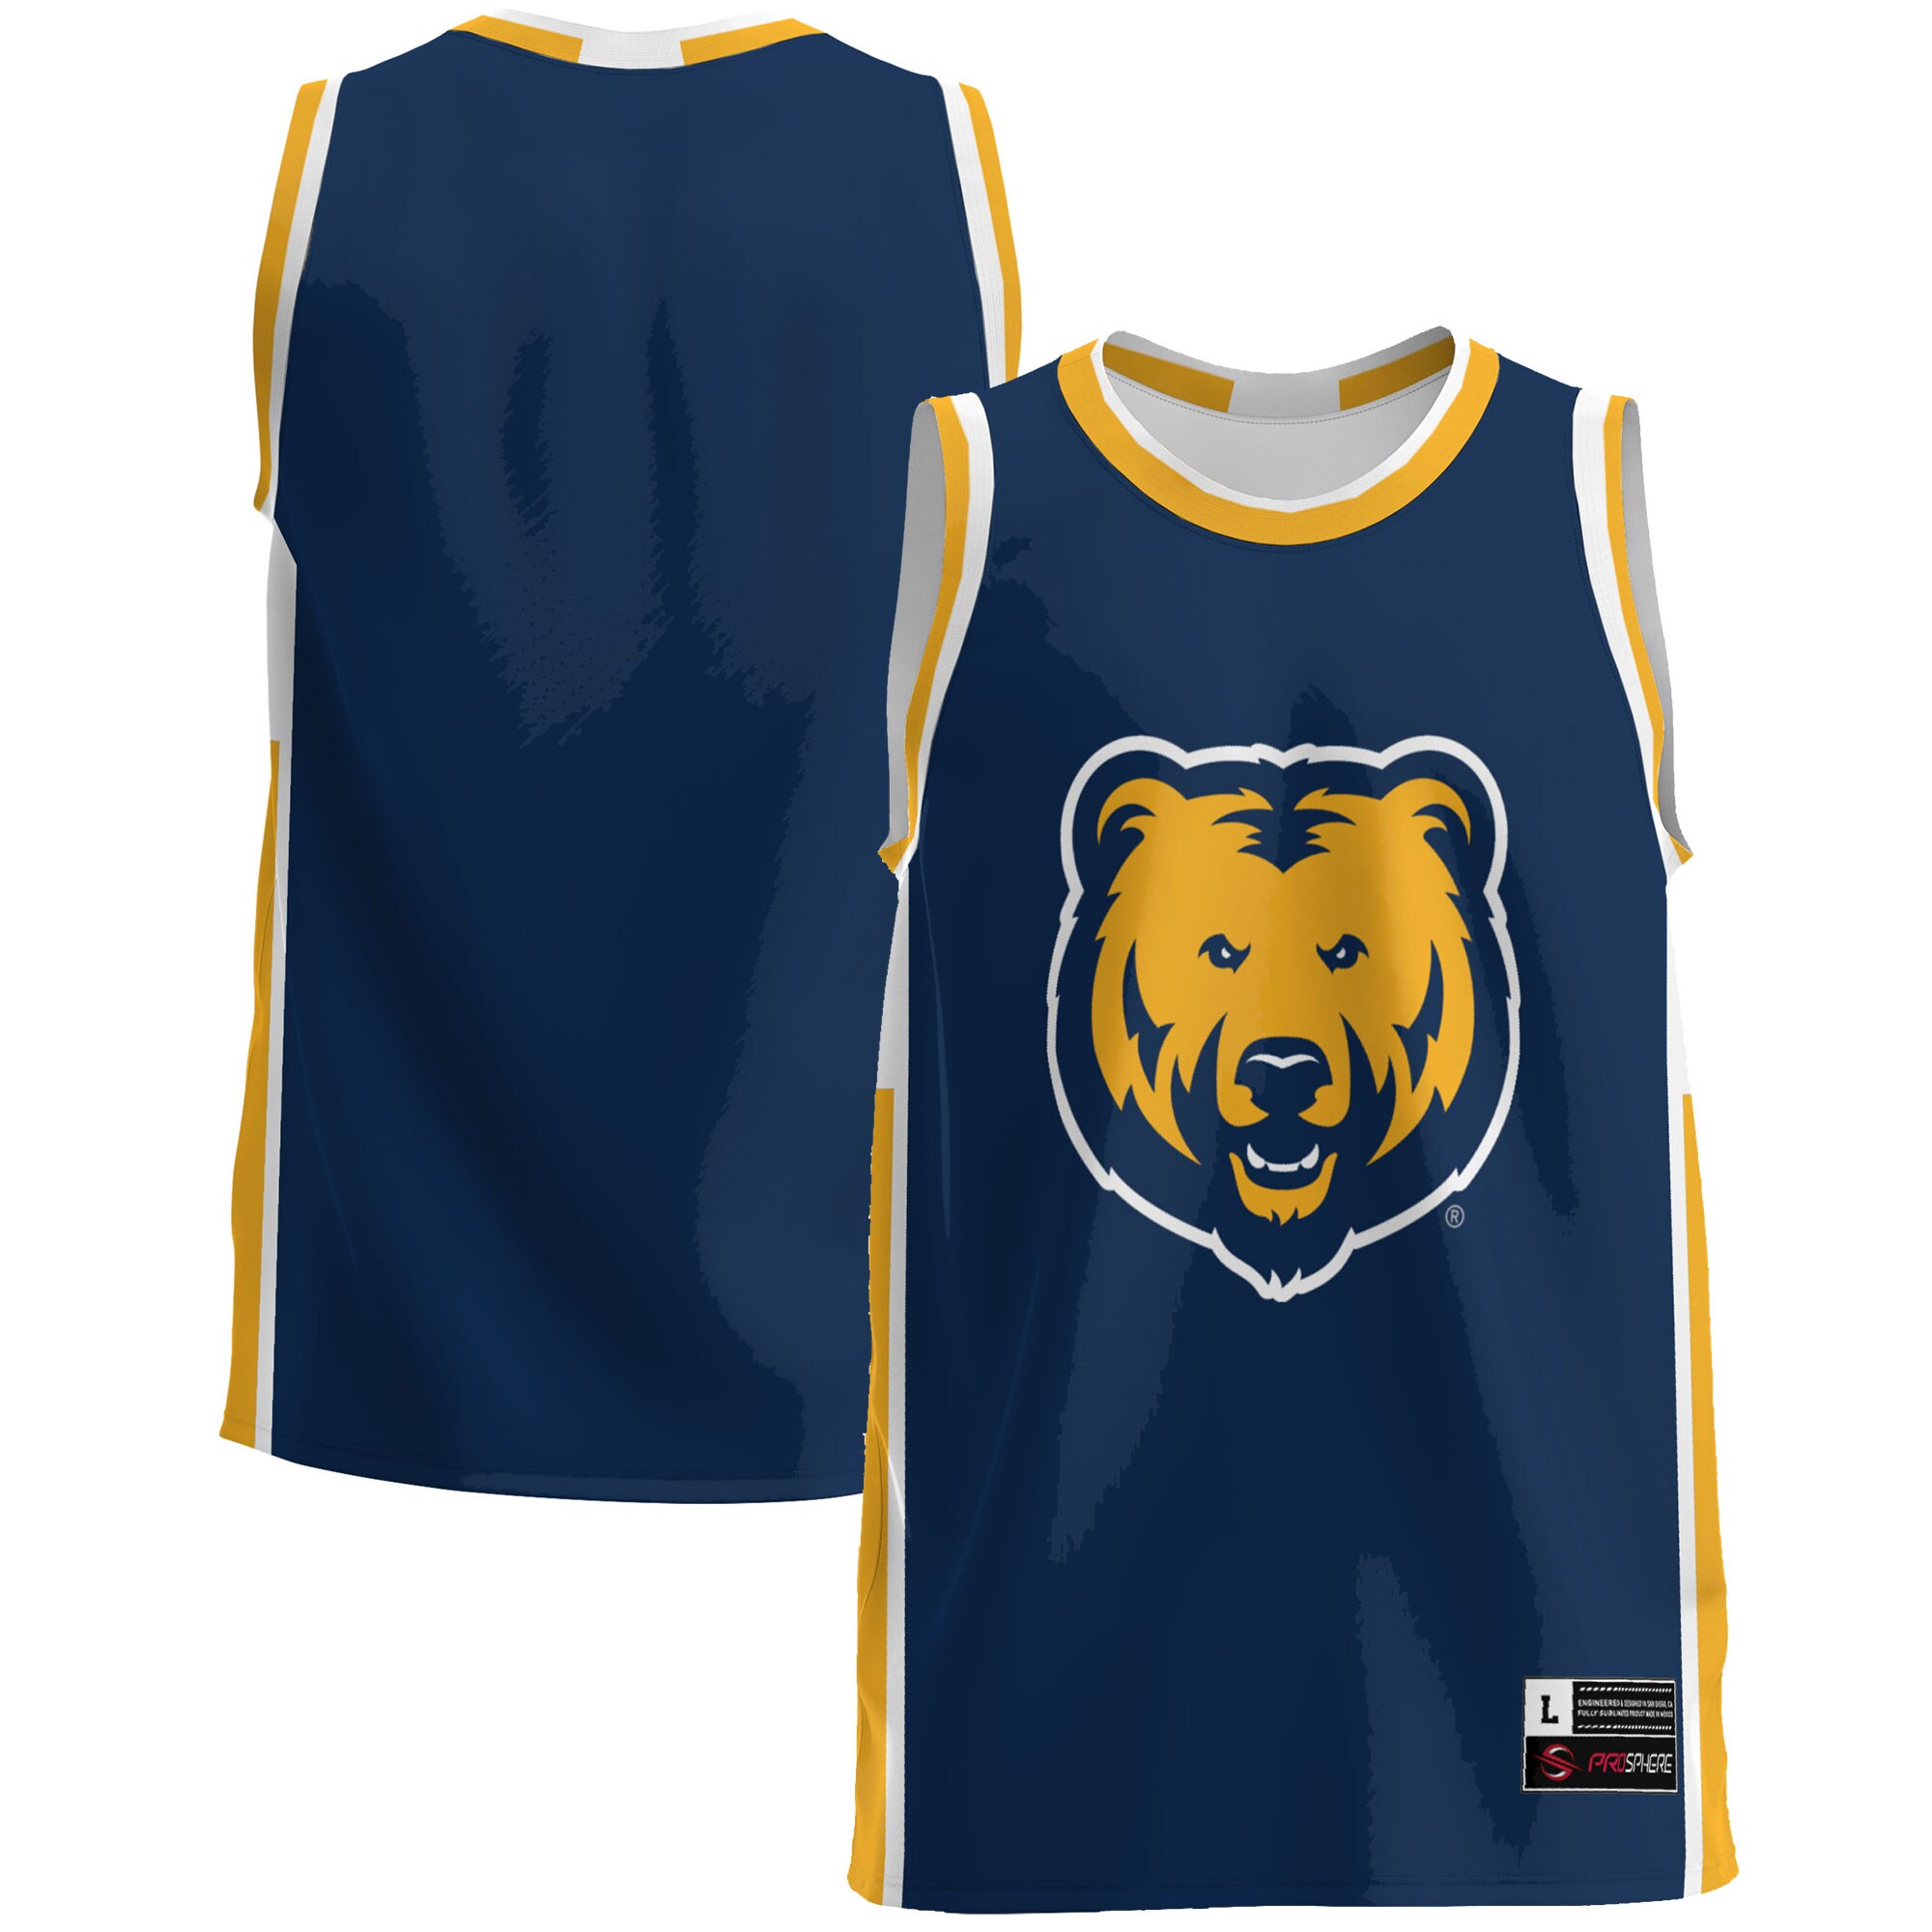 Northern Colorado Bears Basketball Jersey - Blue For Youth Women Men